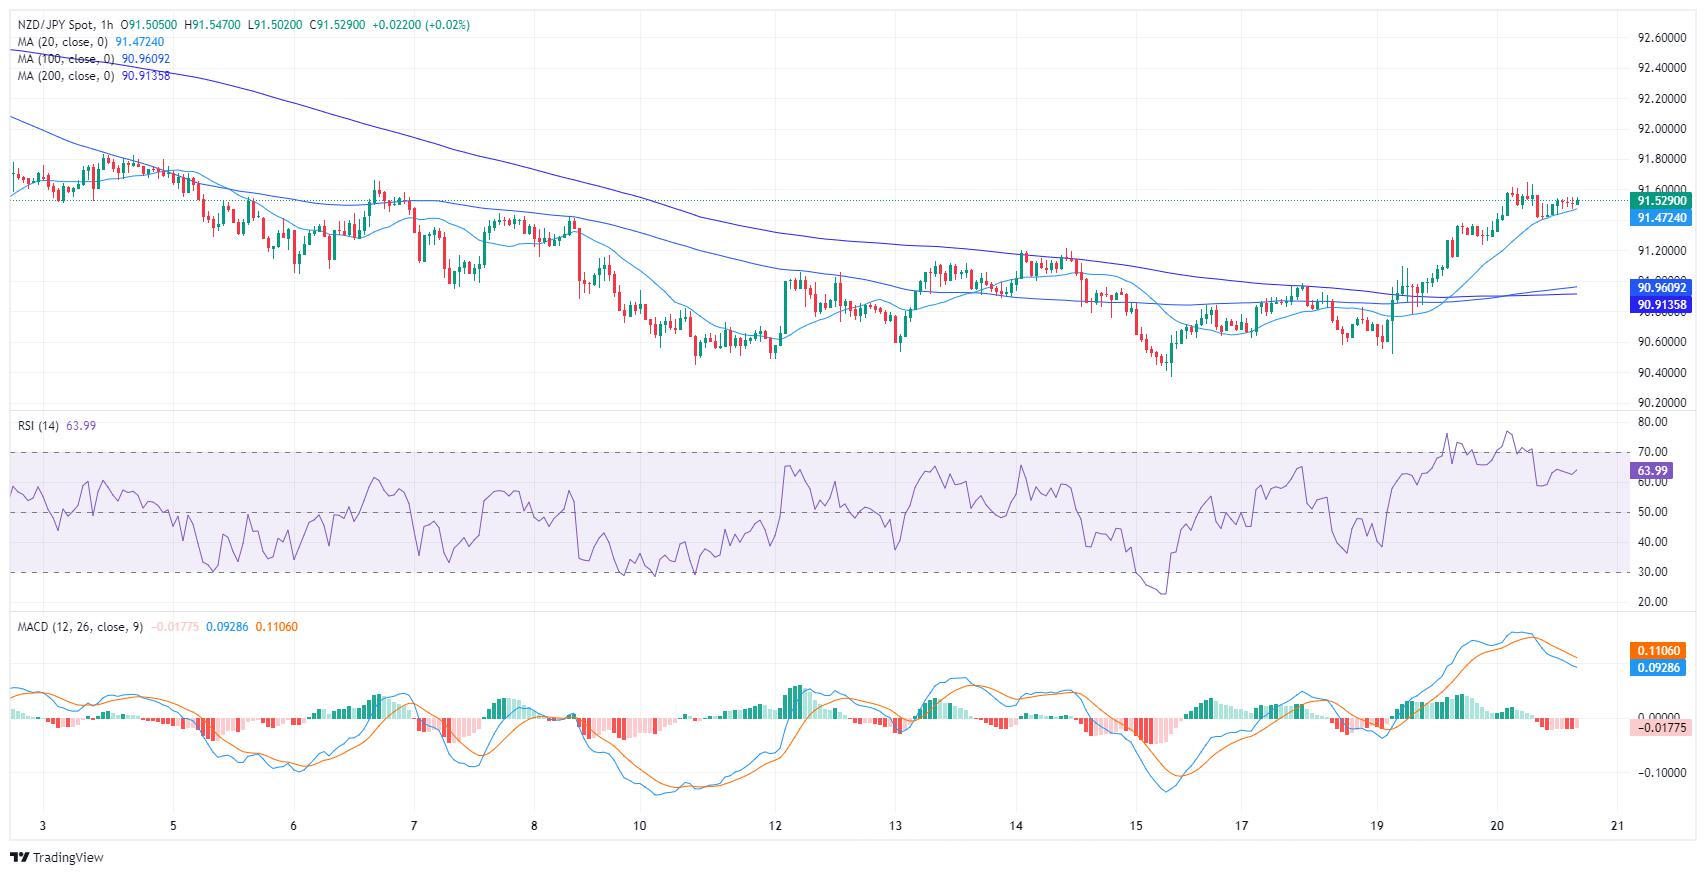 NZD/JPY Price Analysis: Bulls are firmly in control according to daily trends, houly indicators consolidate